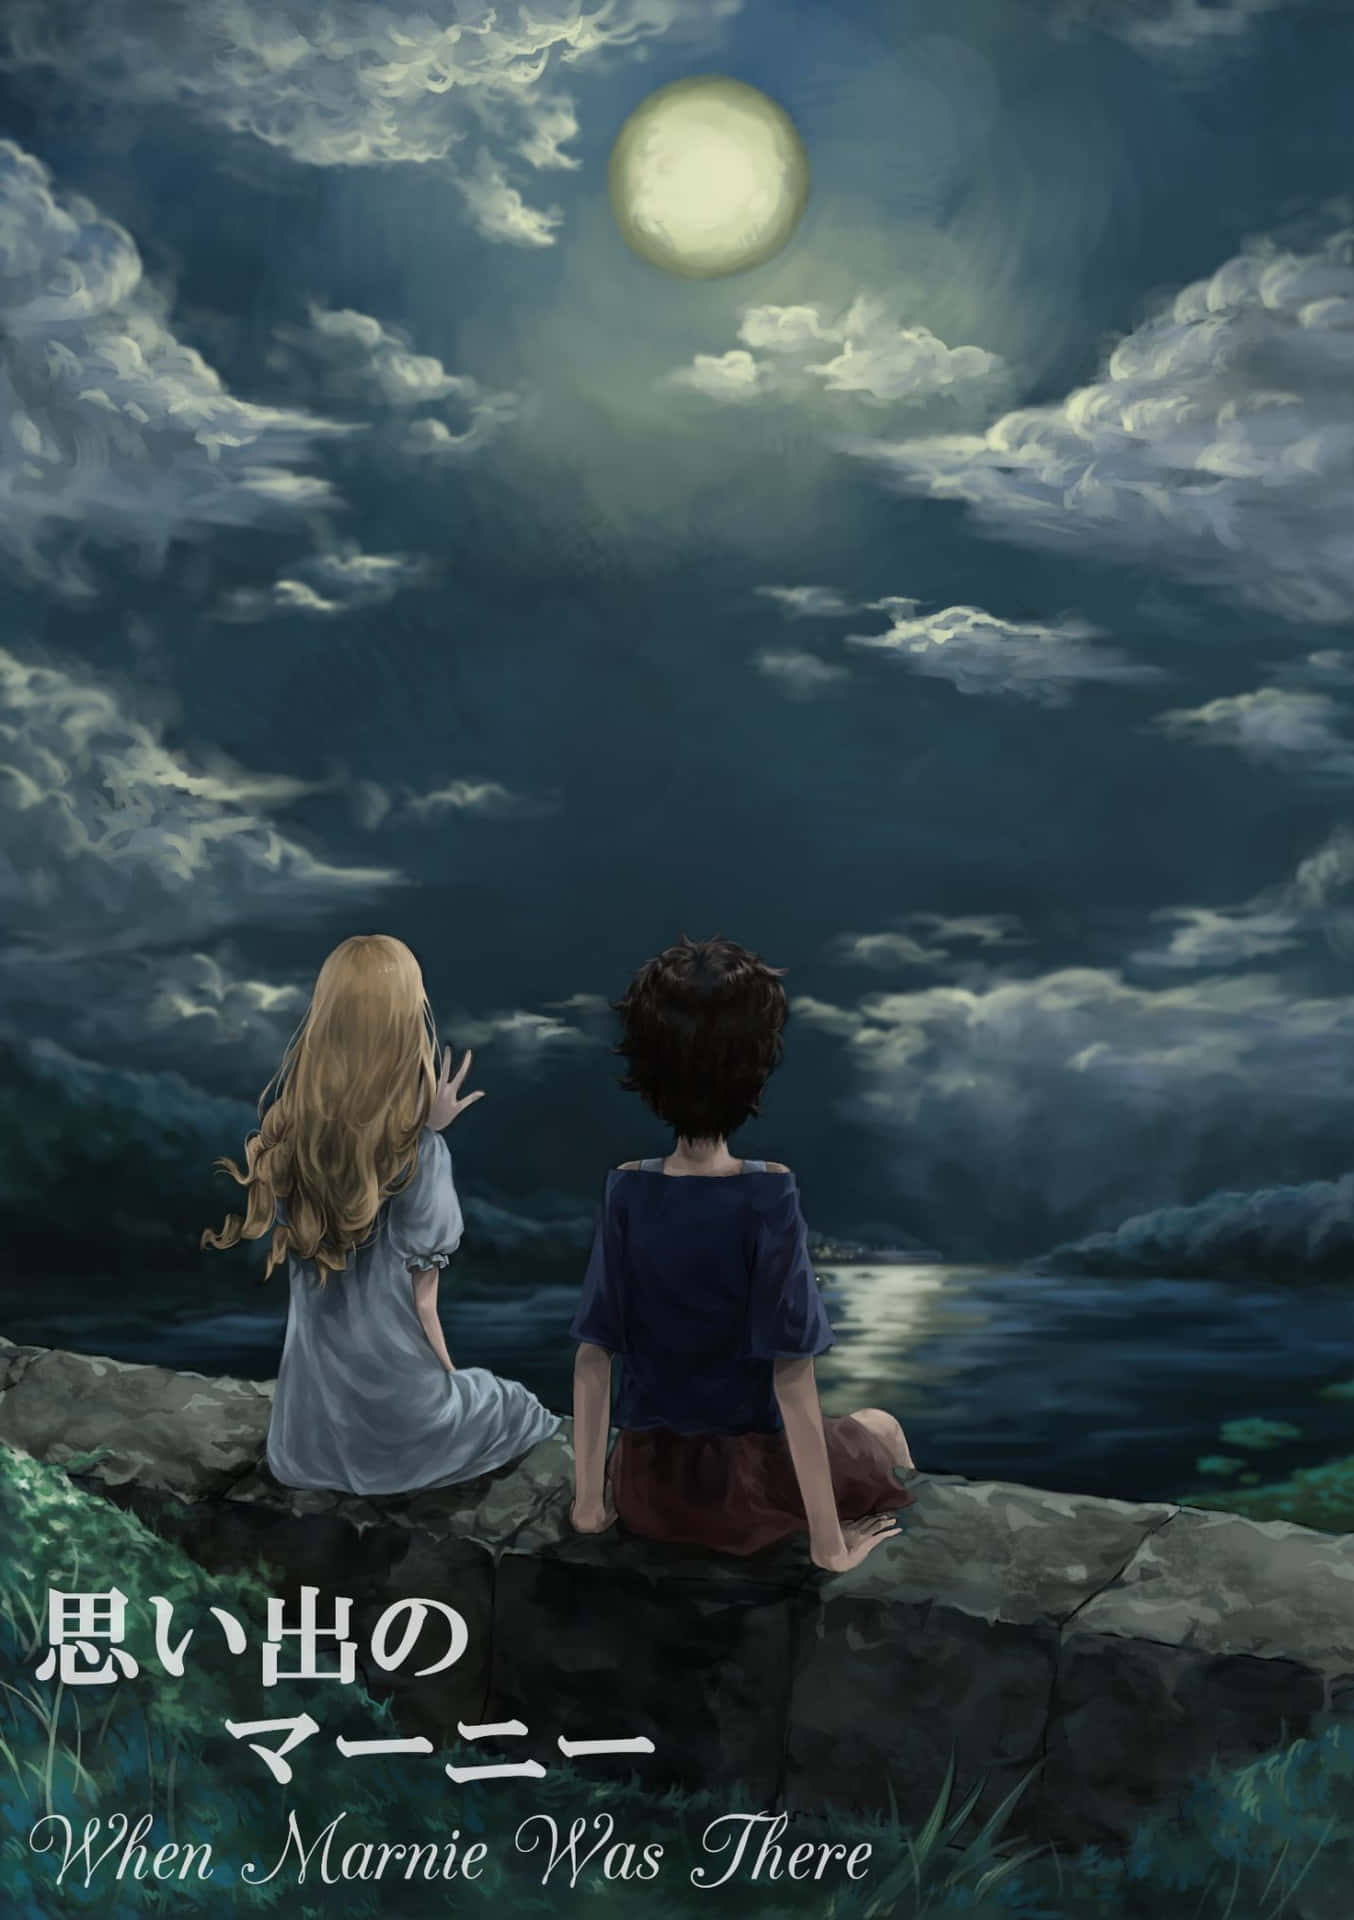 Anna and Marnie having a heartwarming connection in "When Marnie Was There" Wallpaper